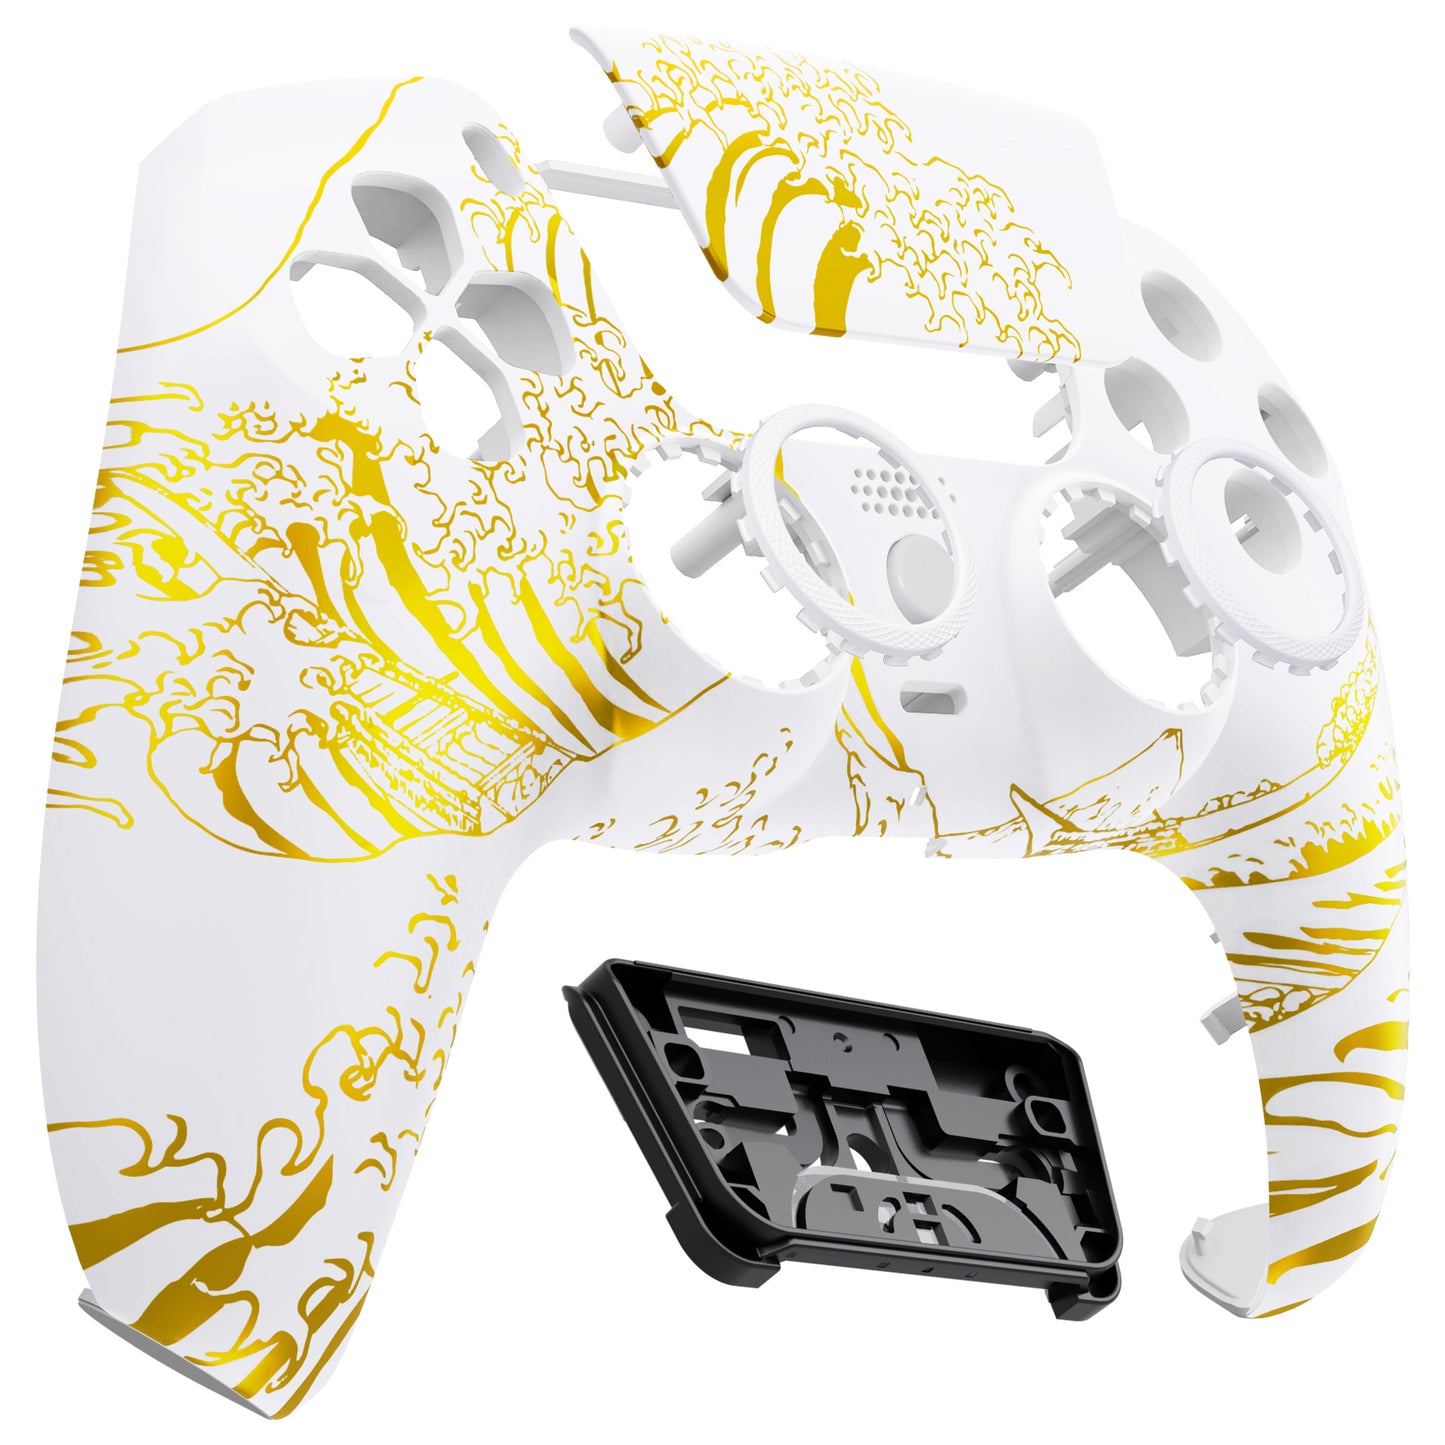 eXtremeRate LUNA Redesigned Replacement Front Shell with Touchpad Compatible with PS5 Controller BDM-010/020/030/040 - The Great GOLDEN Wave Off Kanagawa - White eXtremeRate